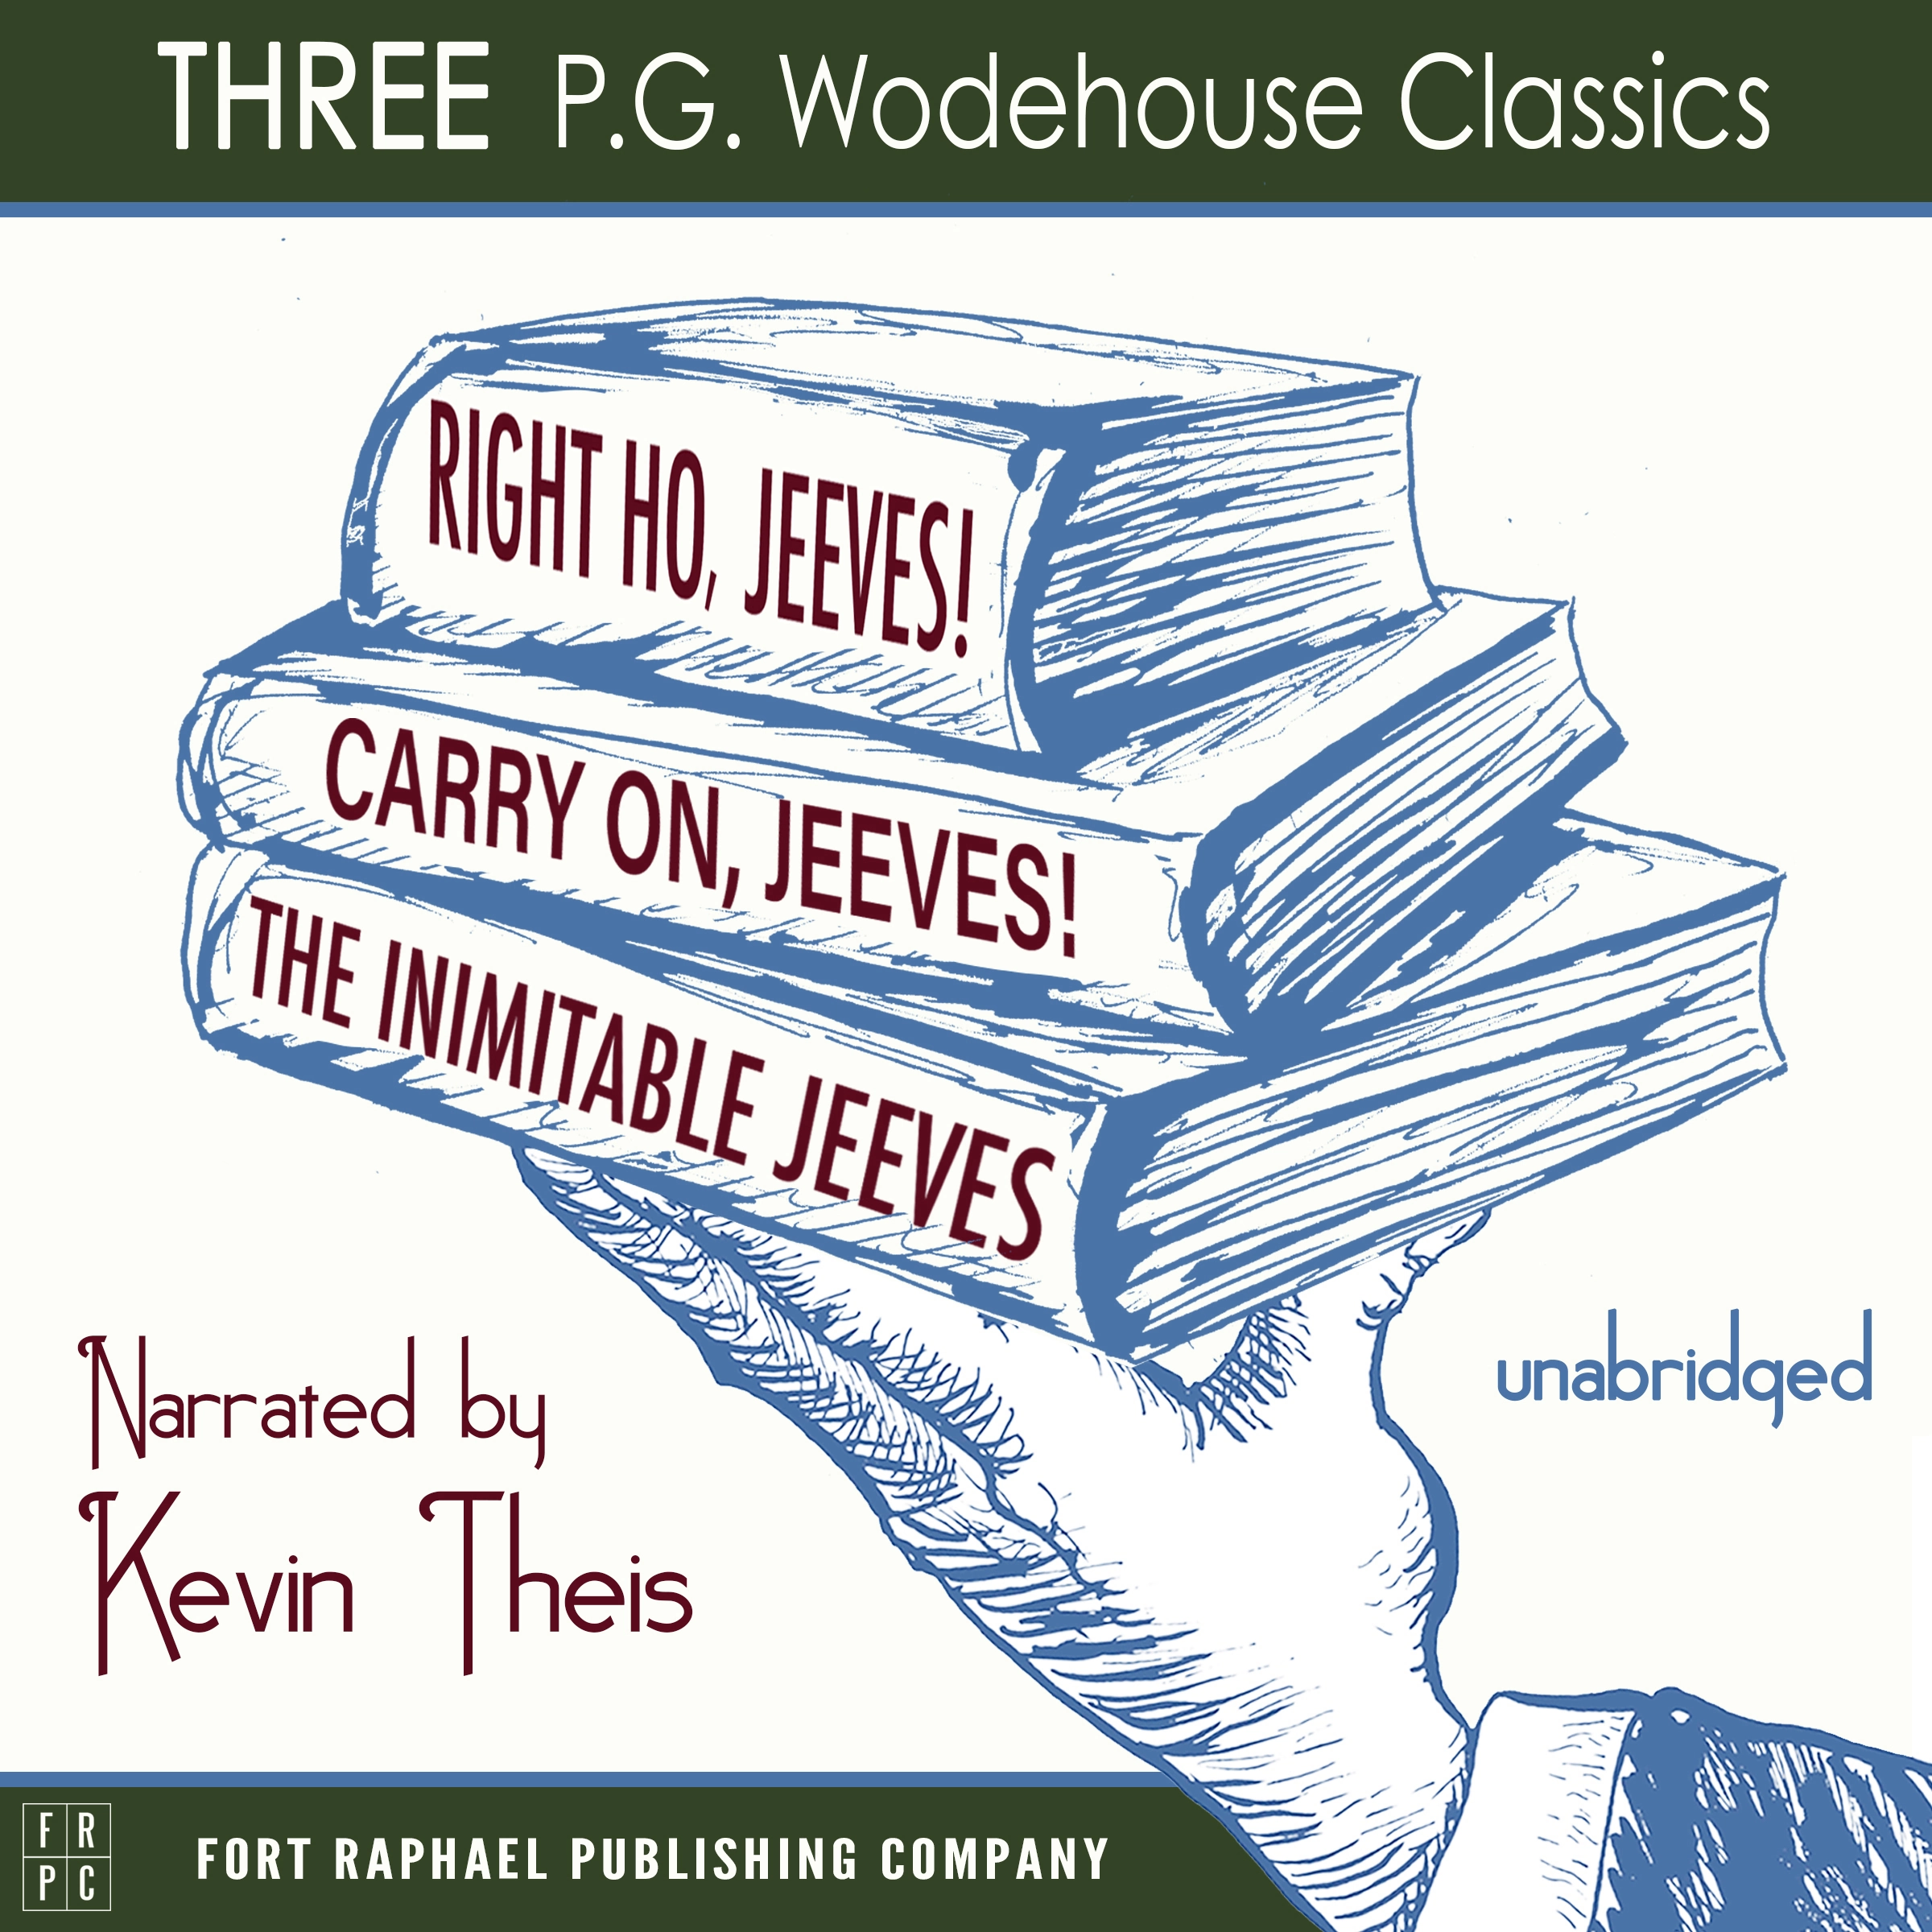 Carry On, Jeeves, The Inimitable Jeeves and Right Ho, Jeeves - THREE P.G. Wodehouse Classics! - Unabridged Audiobook by P.G. Wodehouse